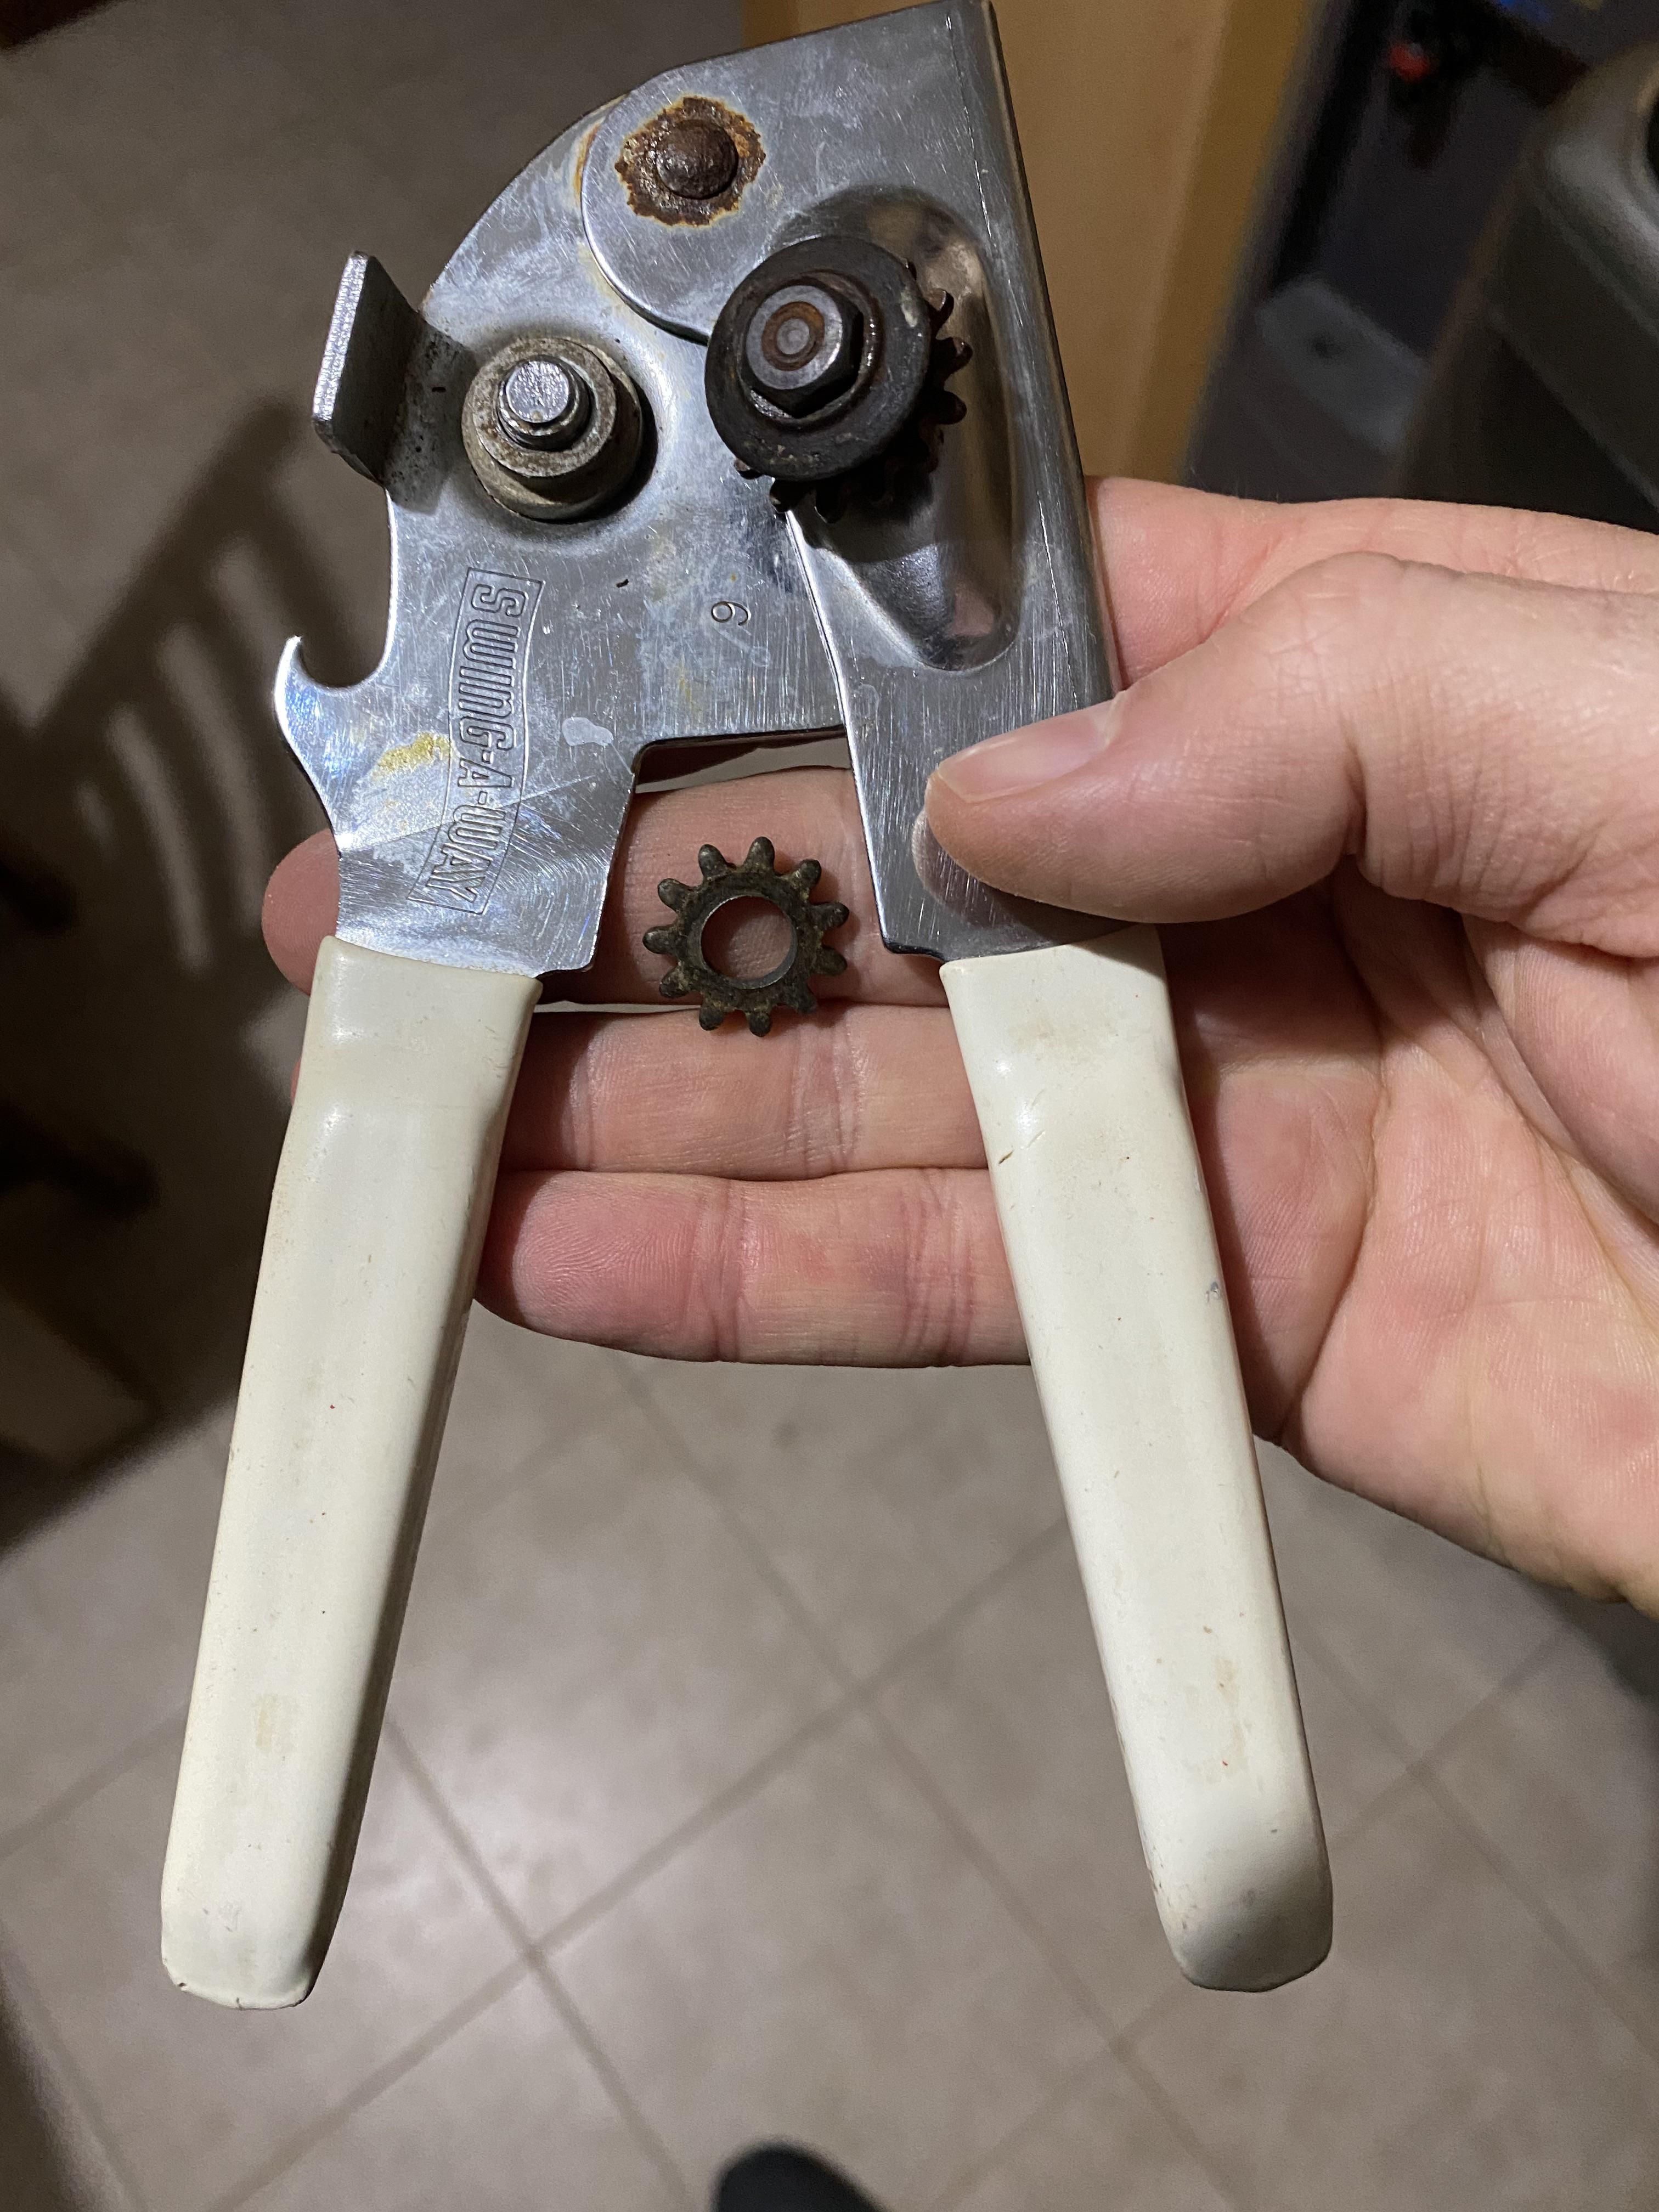 So if this is broken would it now be a... can’t opener?